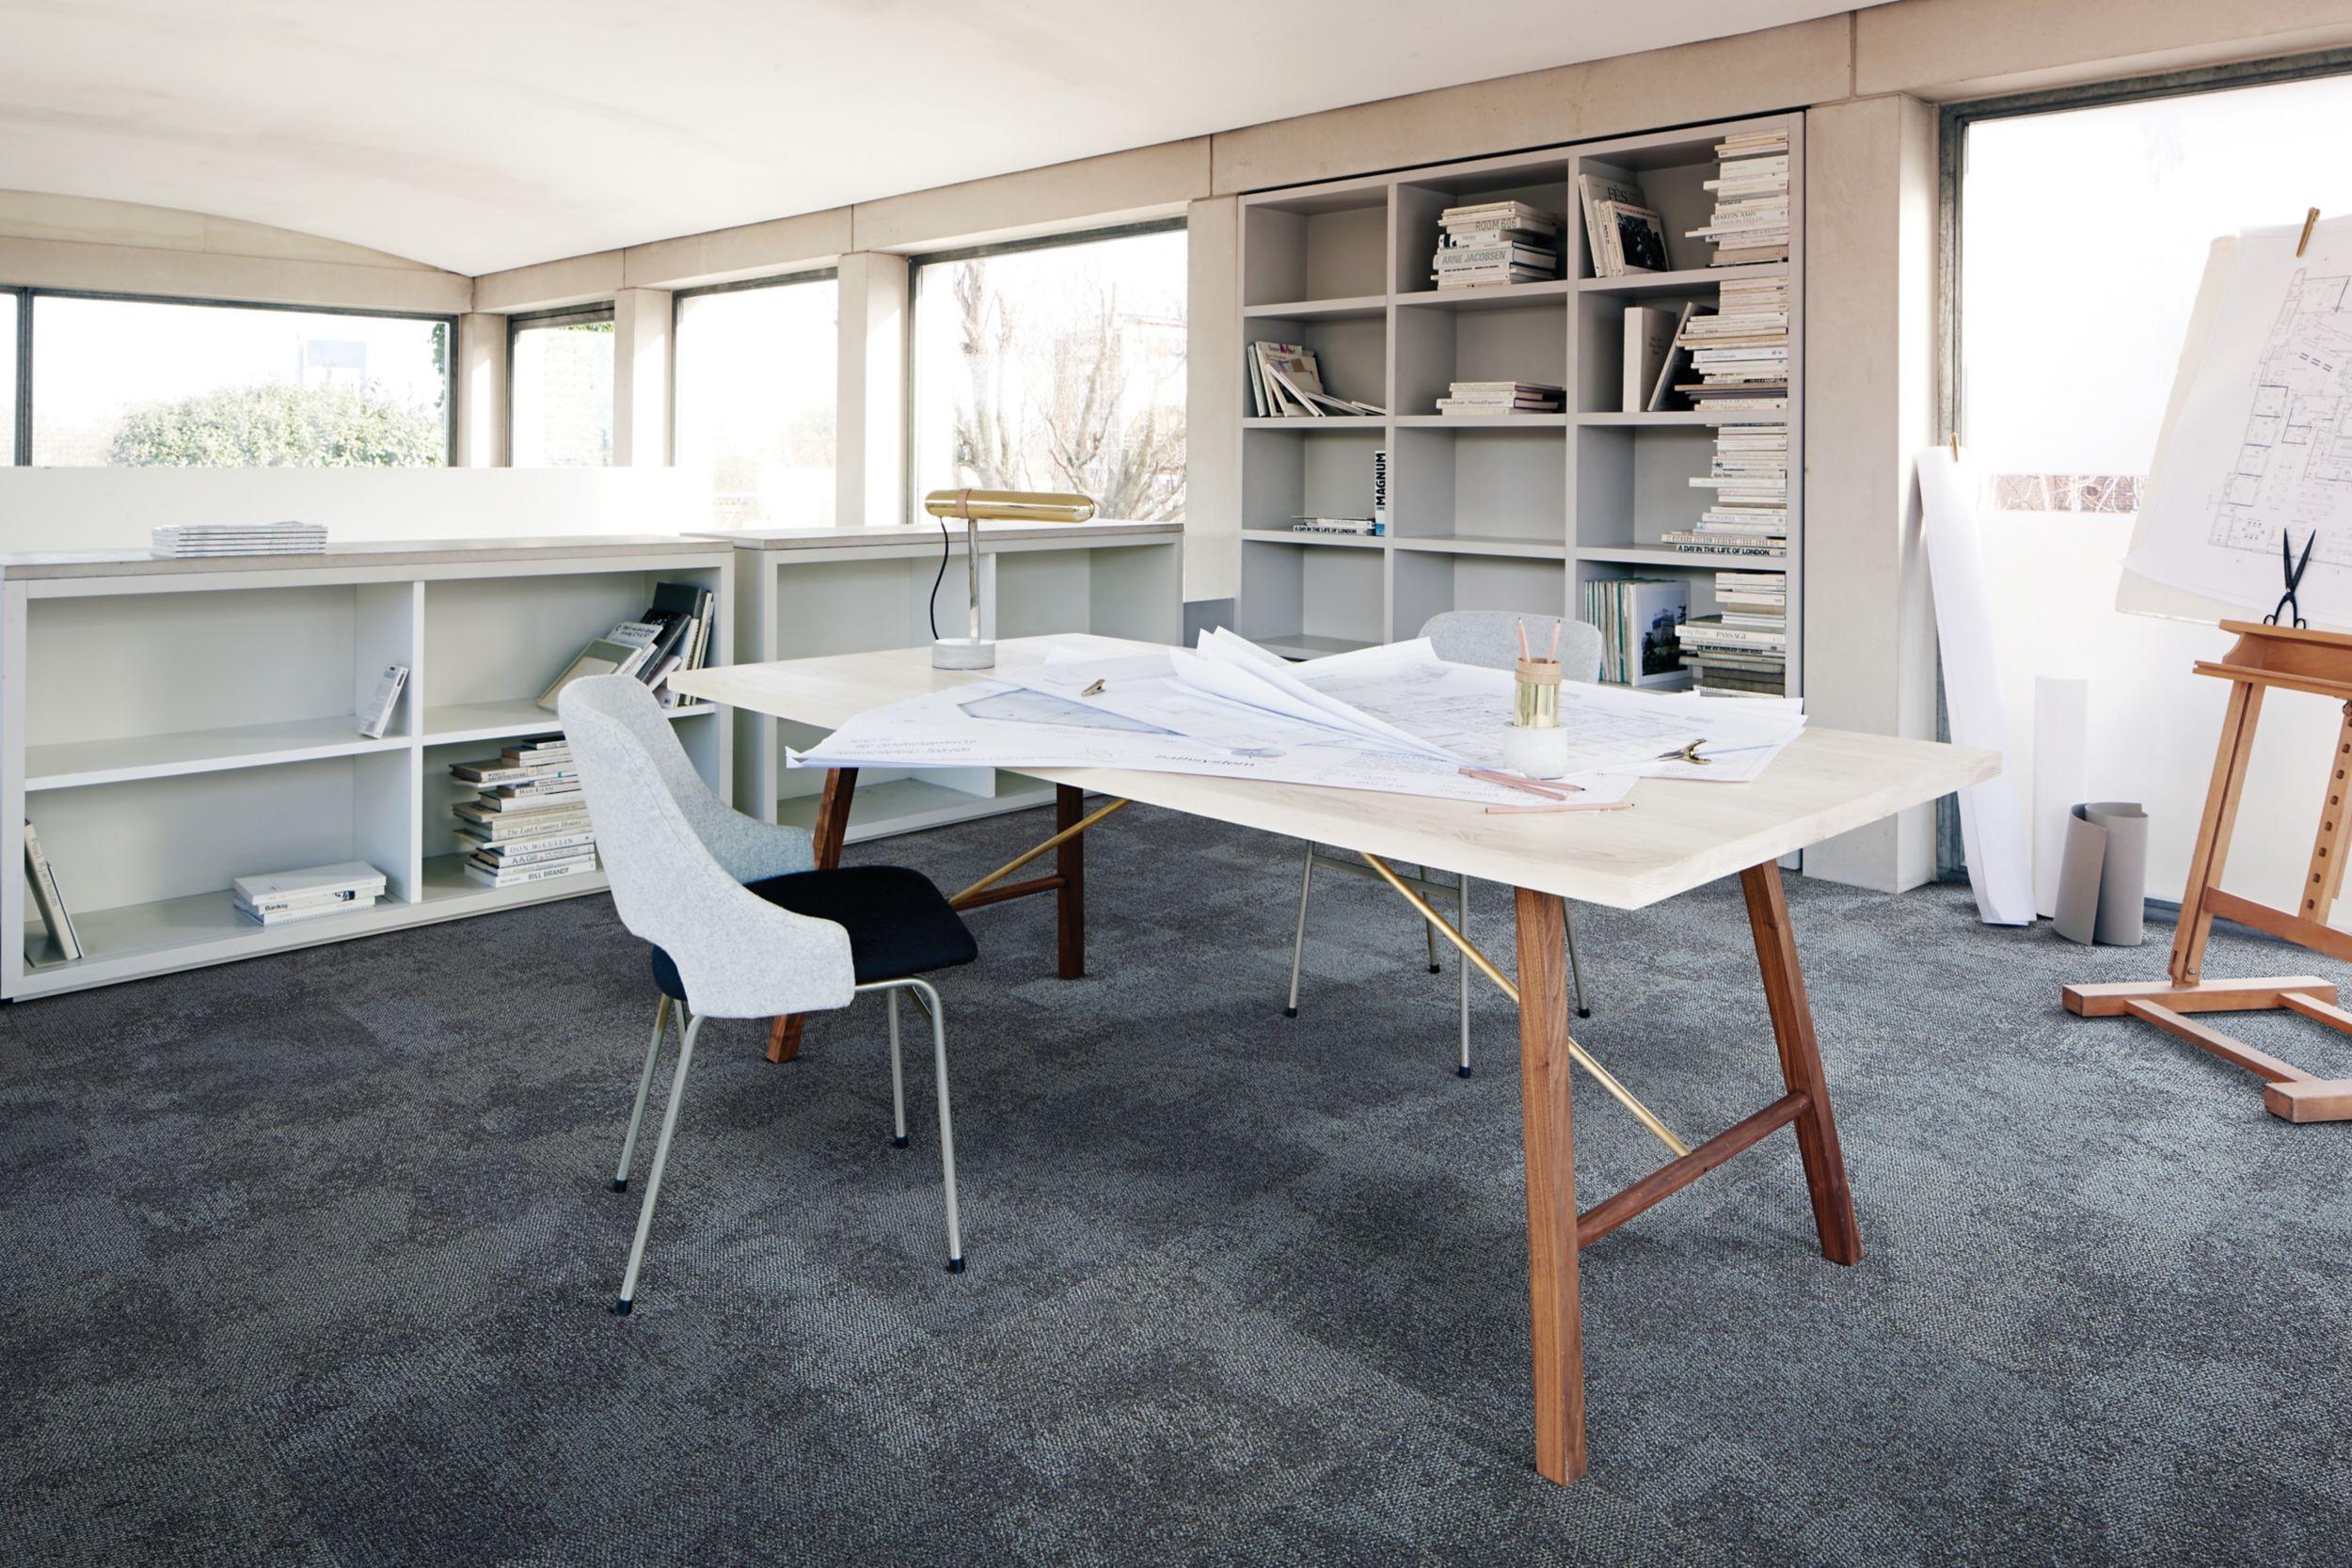 image Interface Composure carpet tile with white table and architectural drawings numéro 1